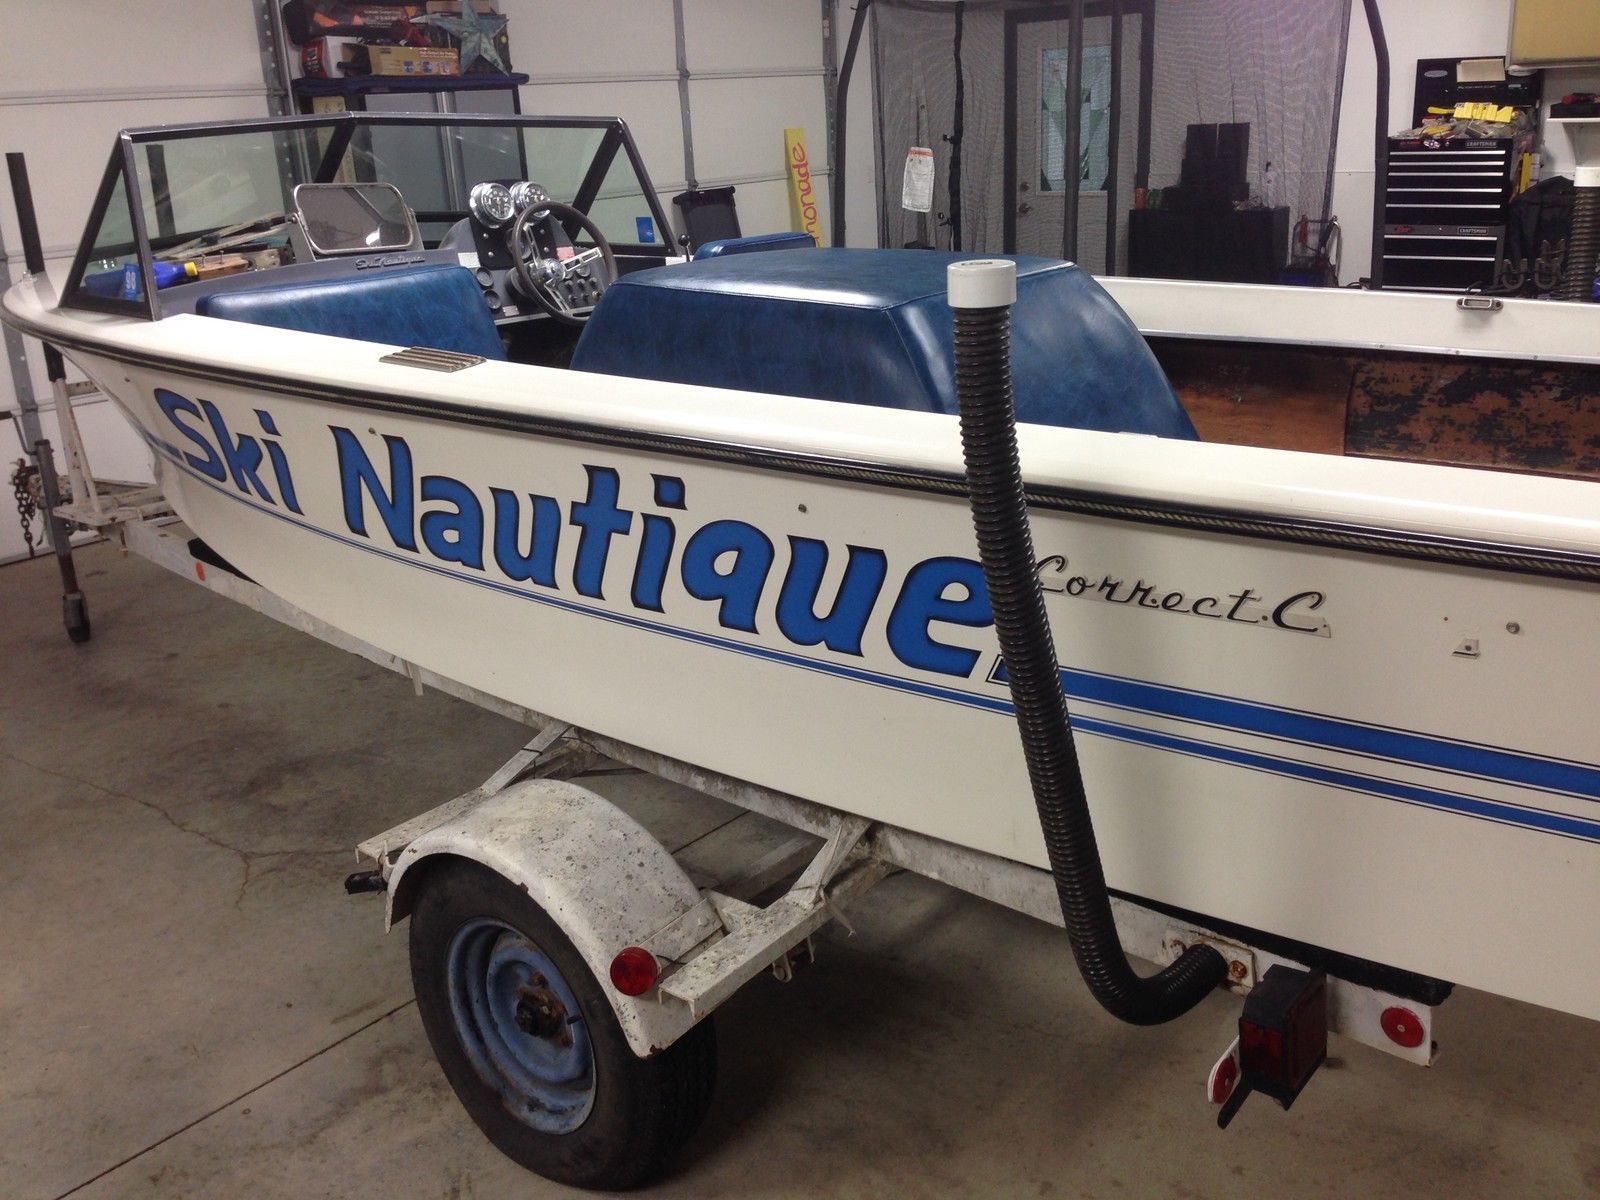 Nautique Ski Nautique 1978 for sale for $1 - Boats-from ...